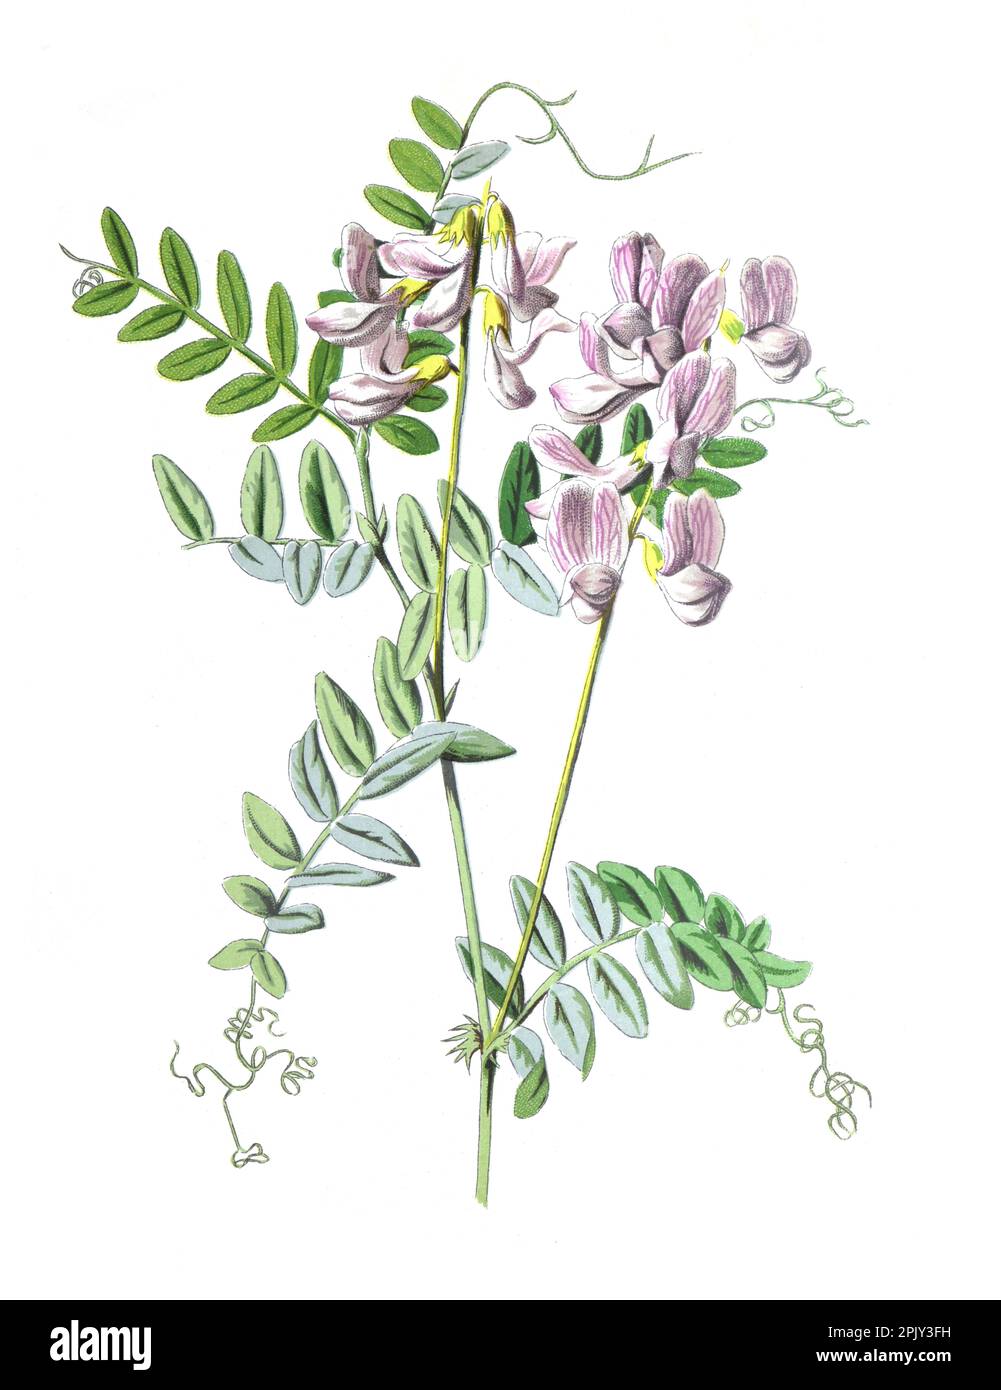 Wood vetch or Vicia sylvatica flower. family Fabaceae. Antique hand drawn field flowers illustration.Vintage and antique wild flowers. Stock Photo